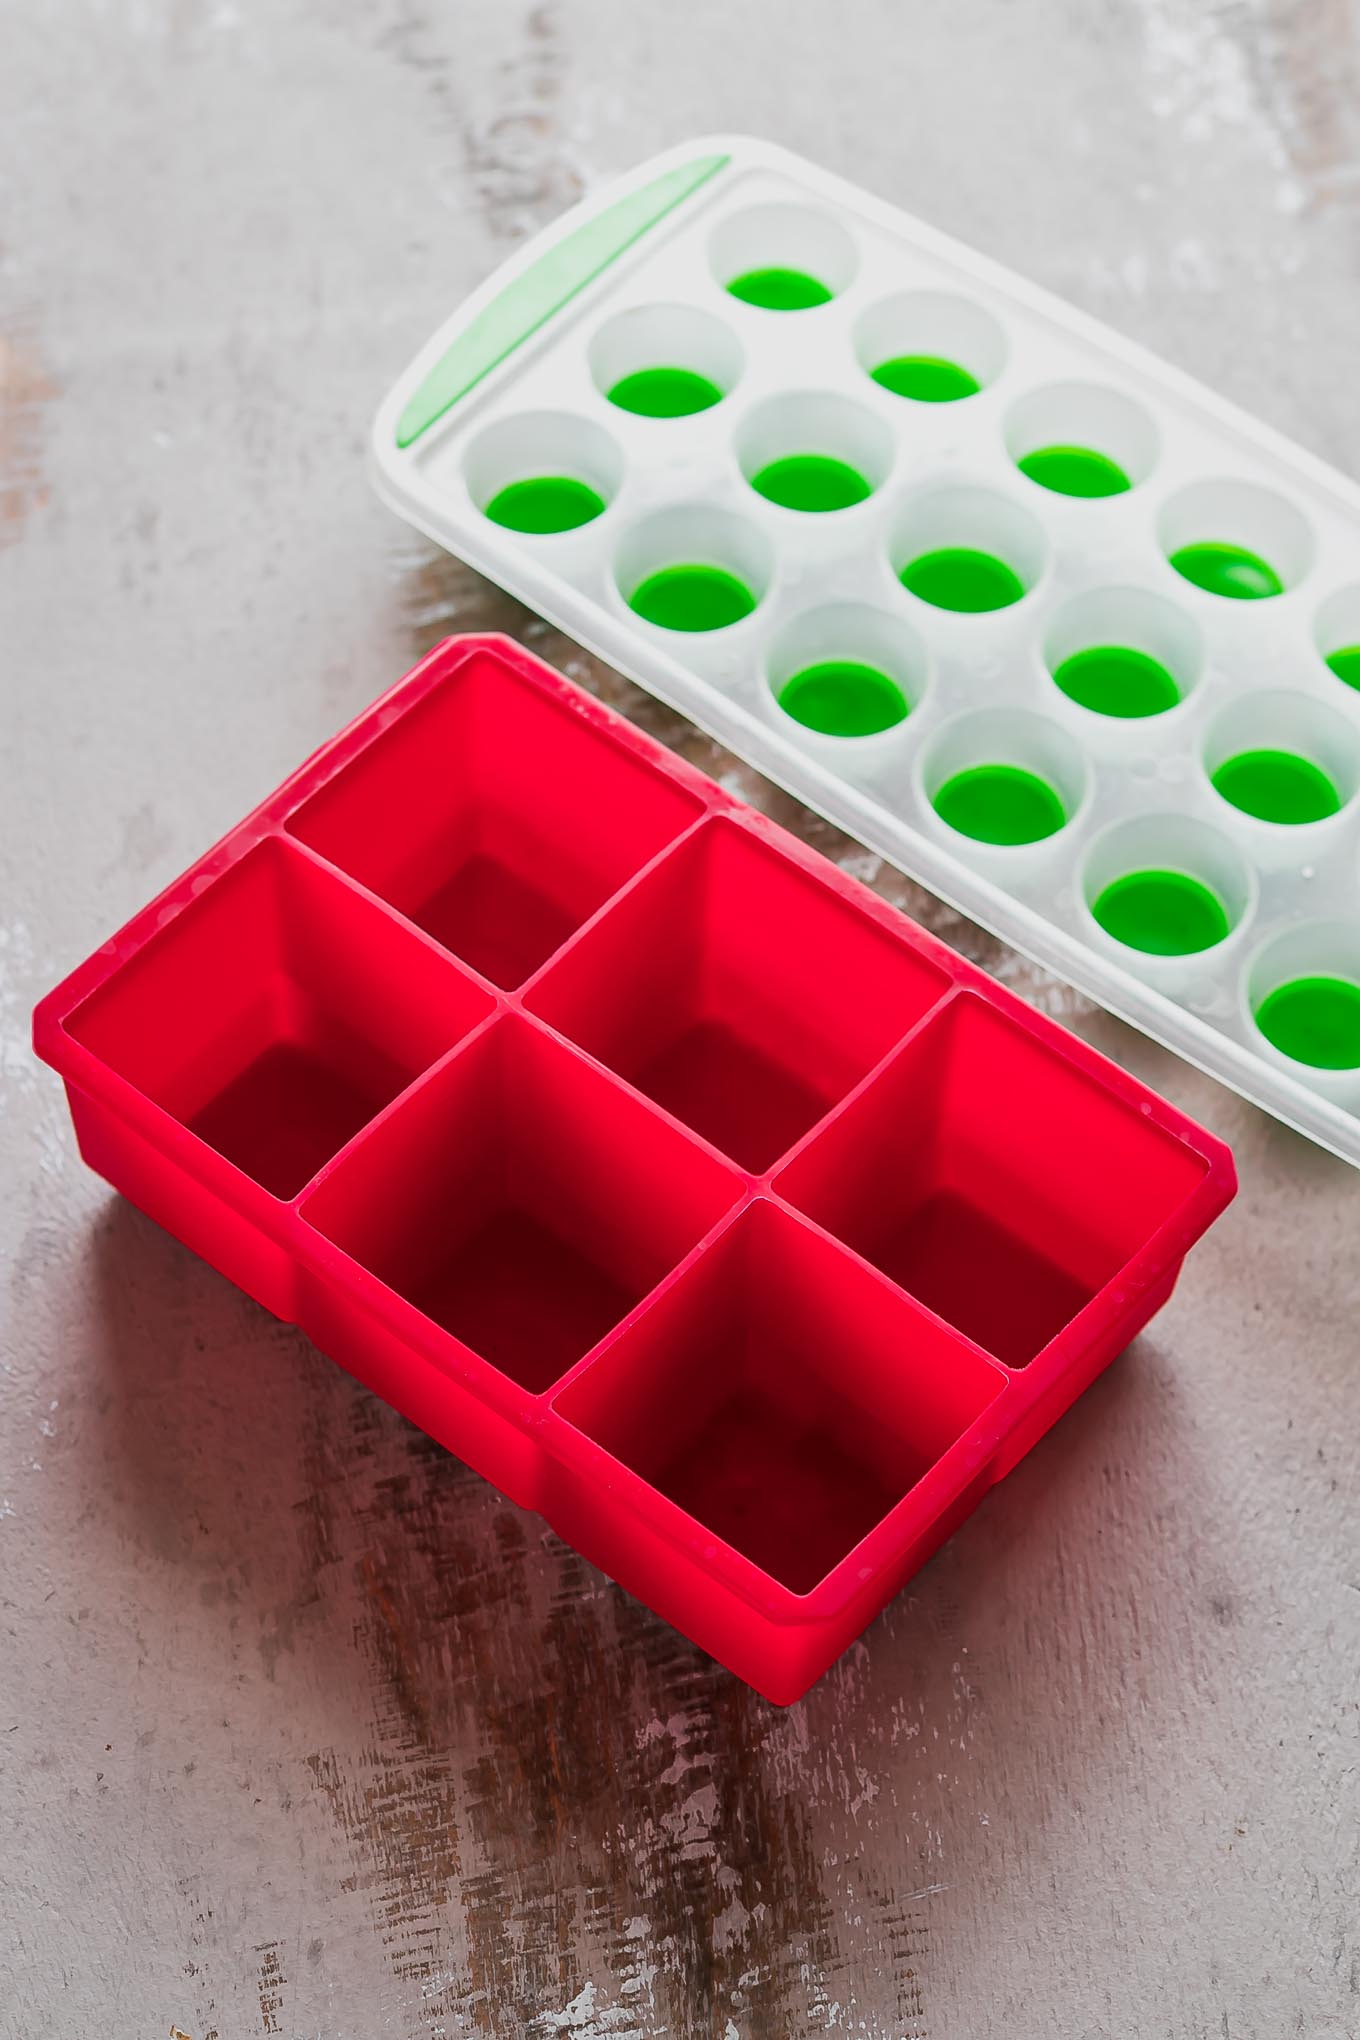 https://www.forkintheroad.co/wp-content/uploads/2022/05/silicone-ice-trays-eco-friendly-111.jpg